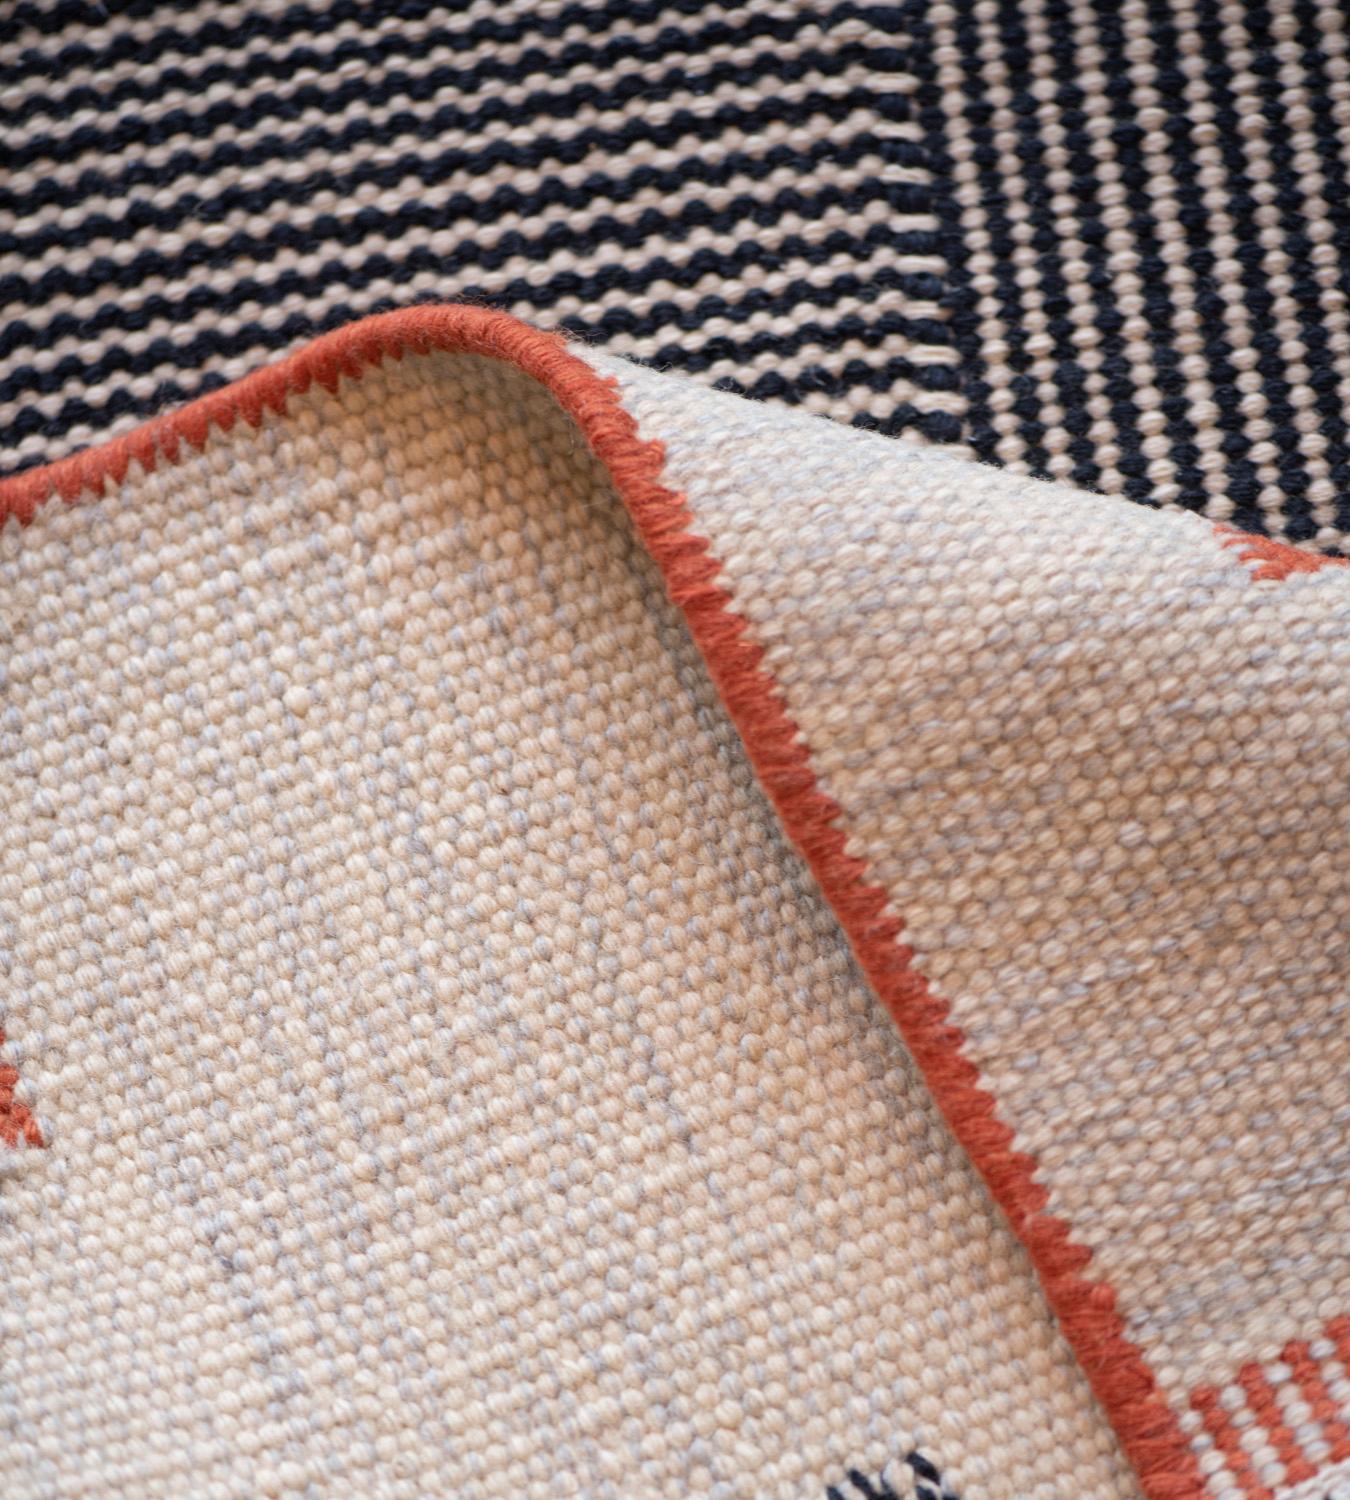 The Mansour modern Swedish collection is primarily inspired by vintage Swedish flat-weave rugs whose geometric designs are relevant as ever in the 21st century. The collection utilizes a number of flat-weave techniques, yielding various distinctive